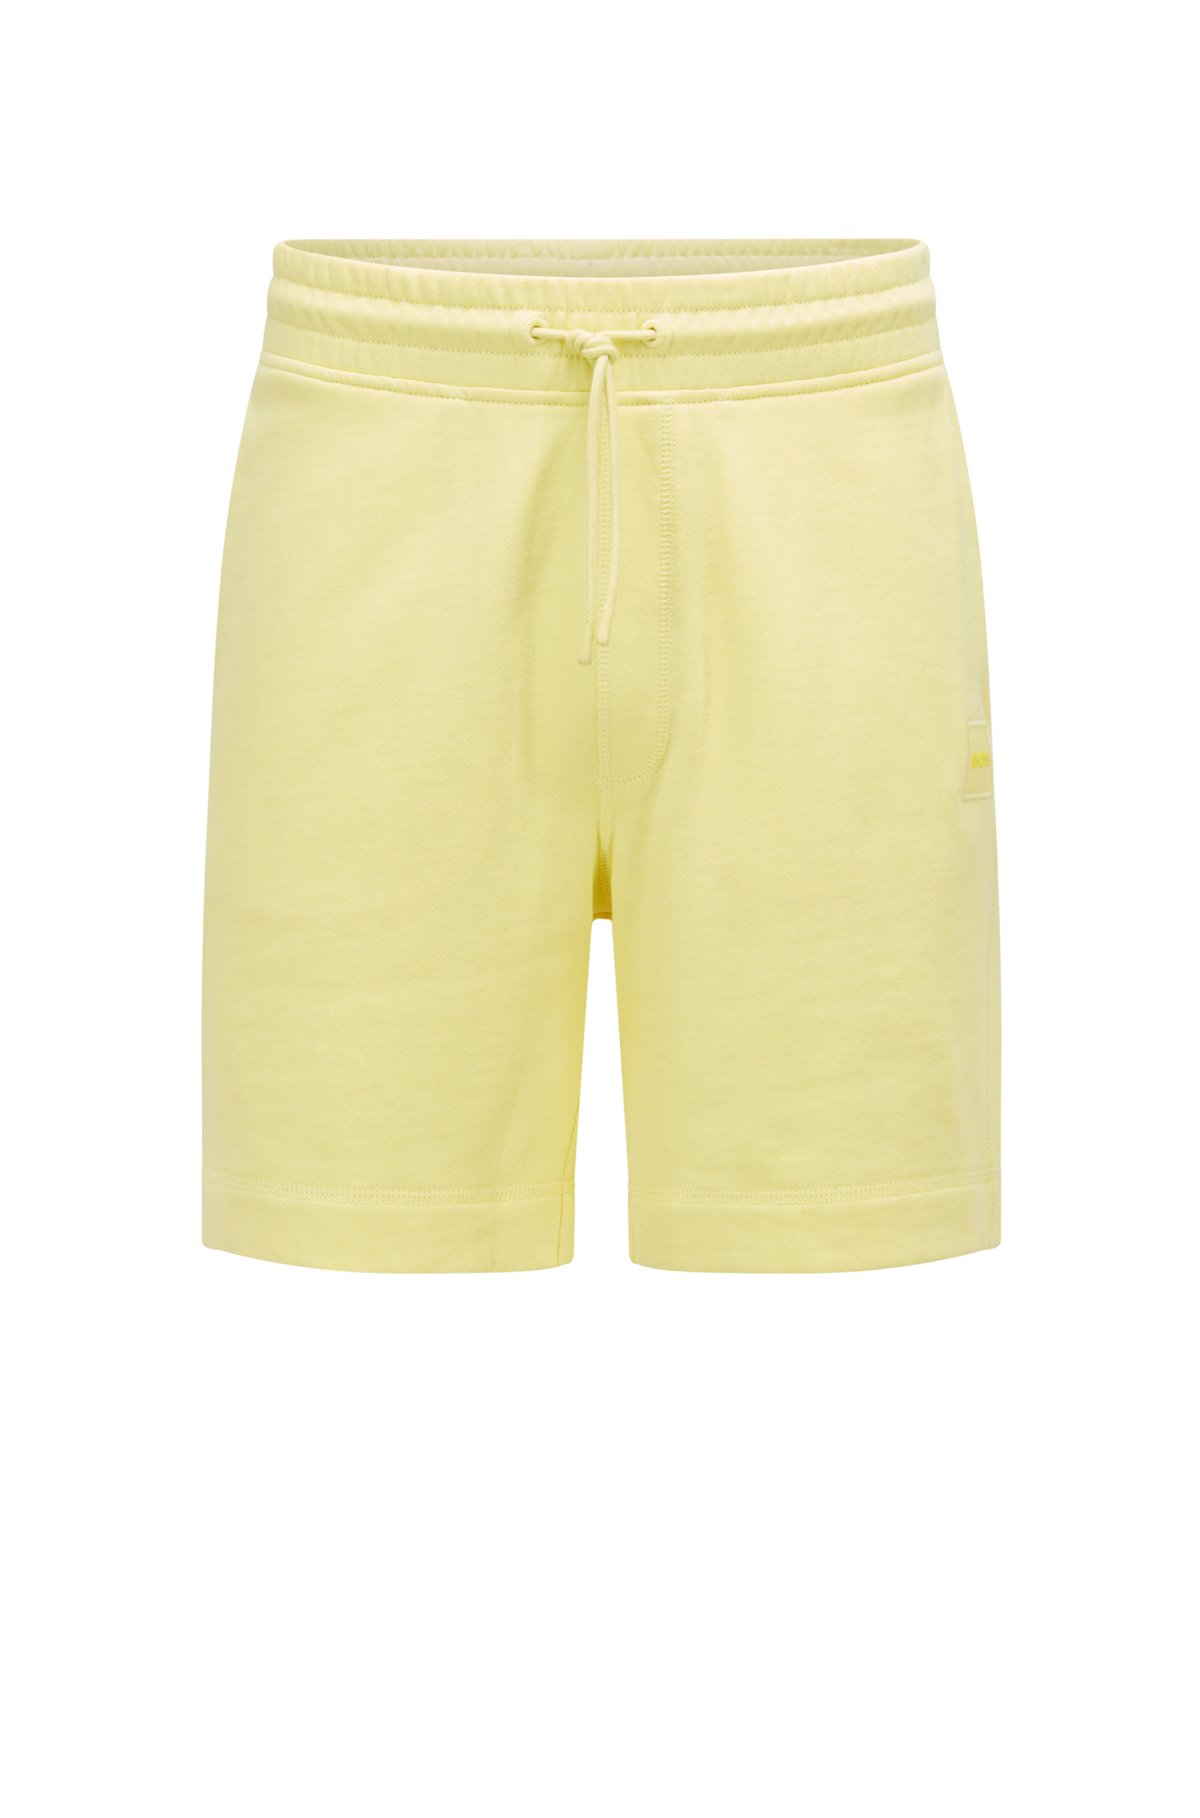 Drawstring shorts in French terry cotton with logo patch, Light Yellow